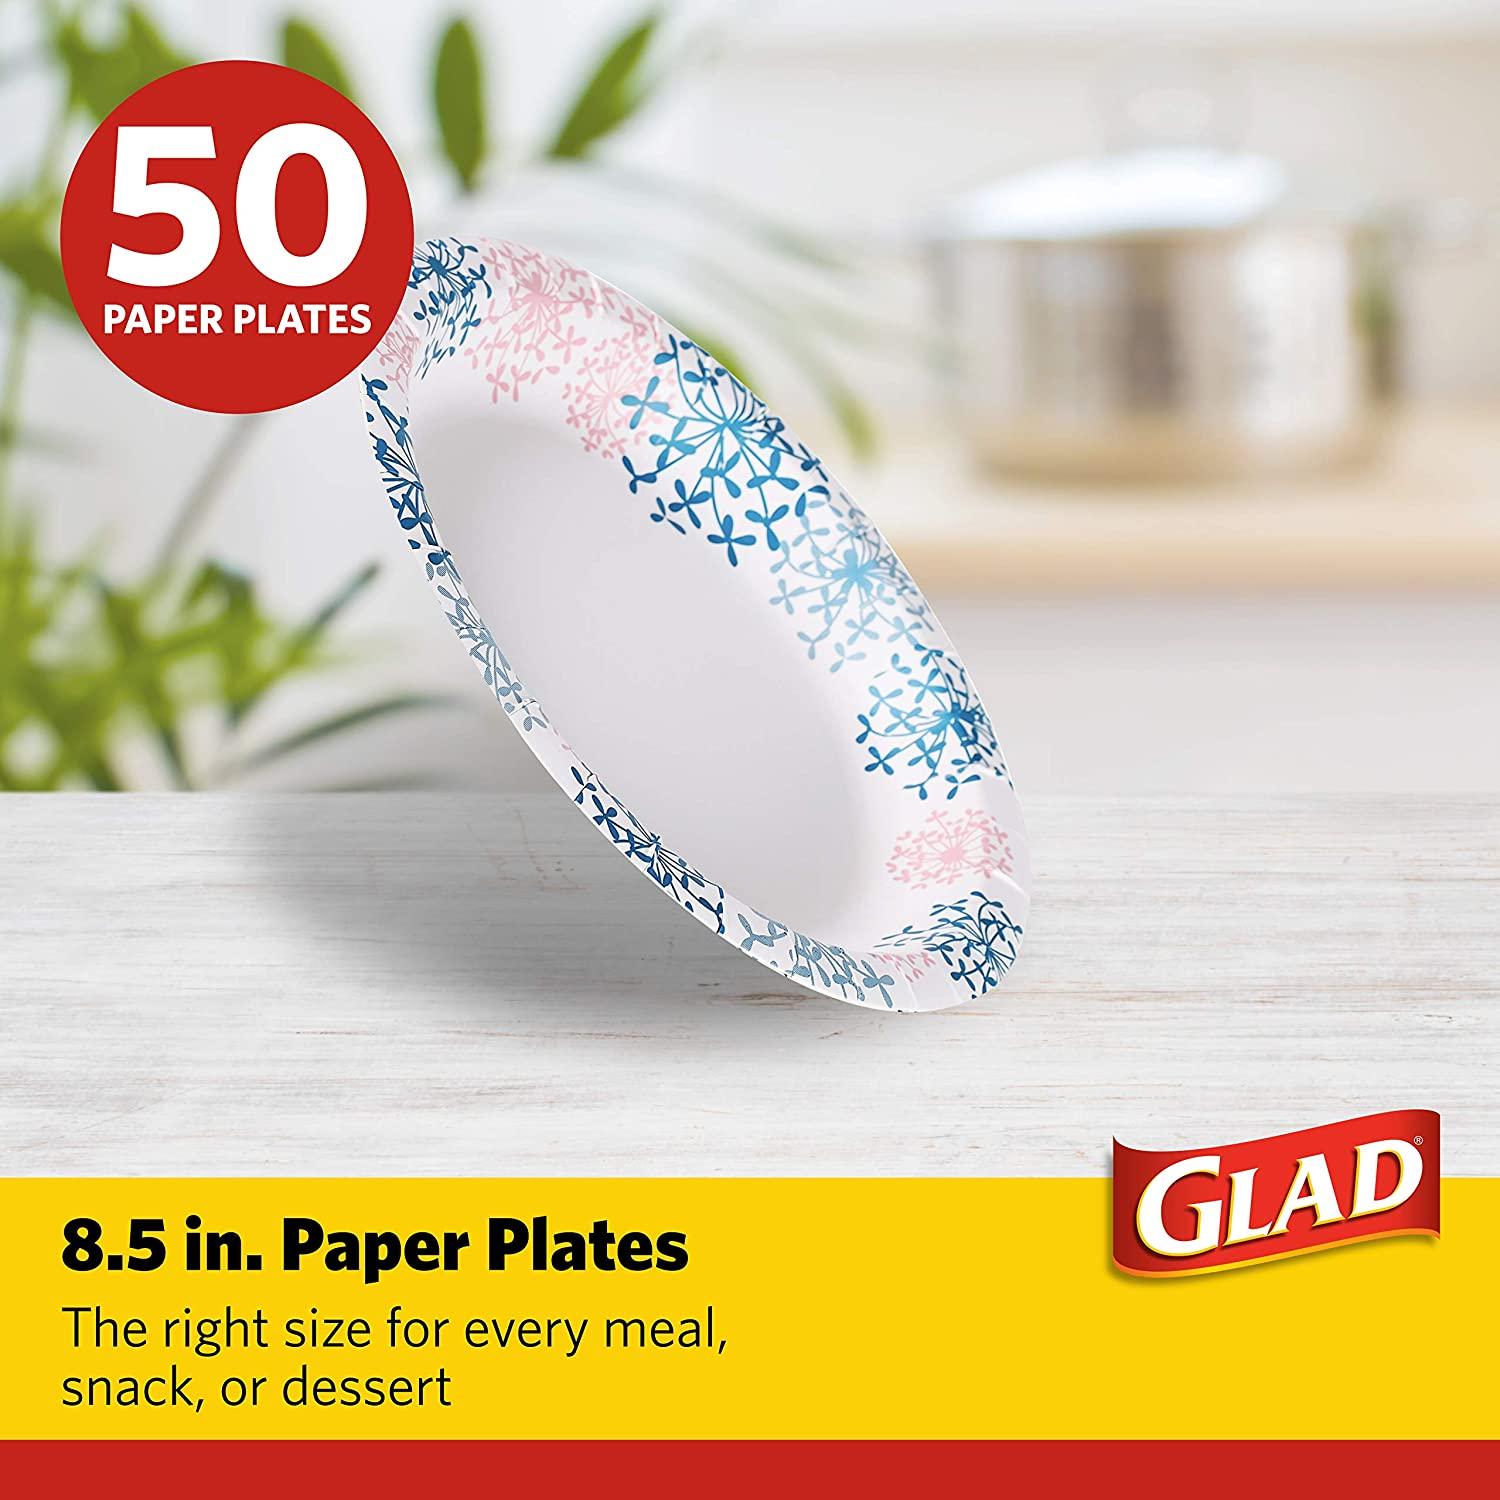 Glad Round Disposable Paper Plates for All Occasions, Soak Proof, Cut  Proof, Microwaveable Heavy Duty Disposable Plates, 8.5 Diameter, 50 Count  Bulk Paper Plates, Pink Hydrangea